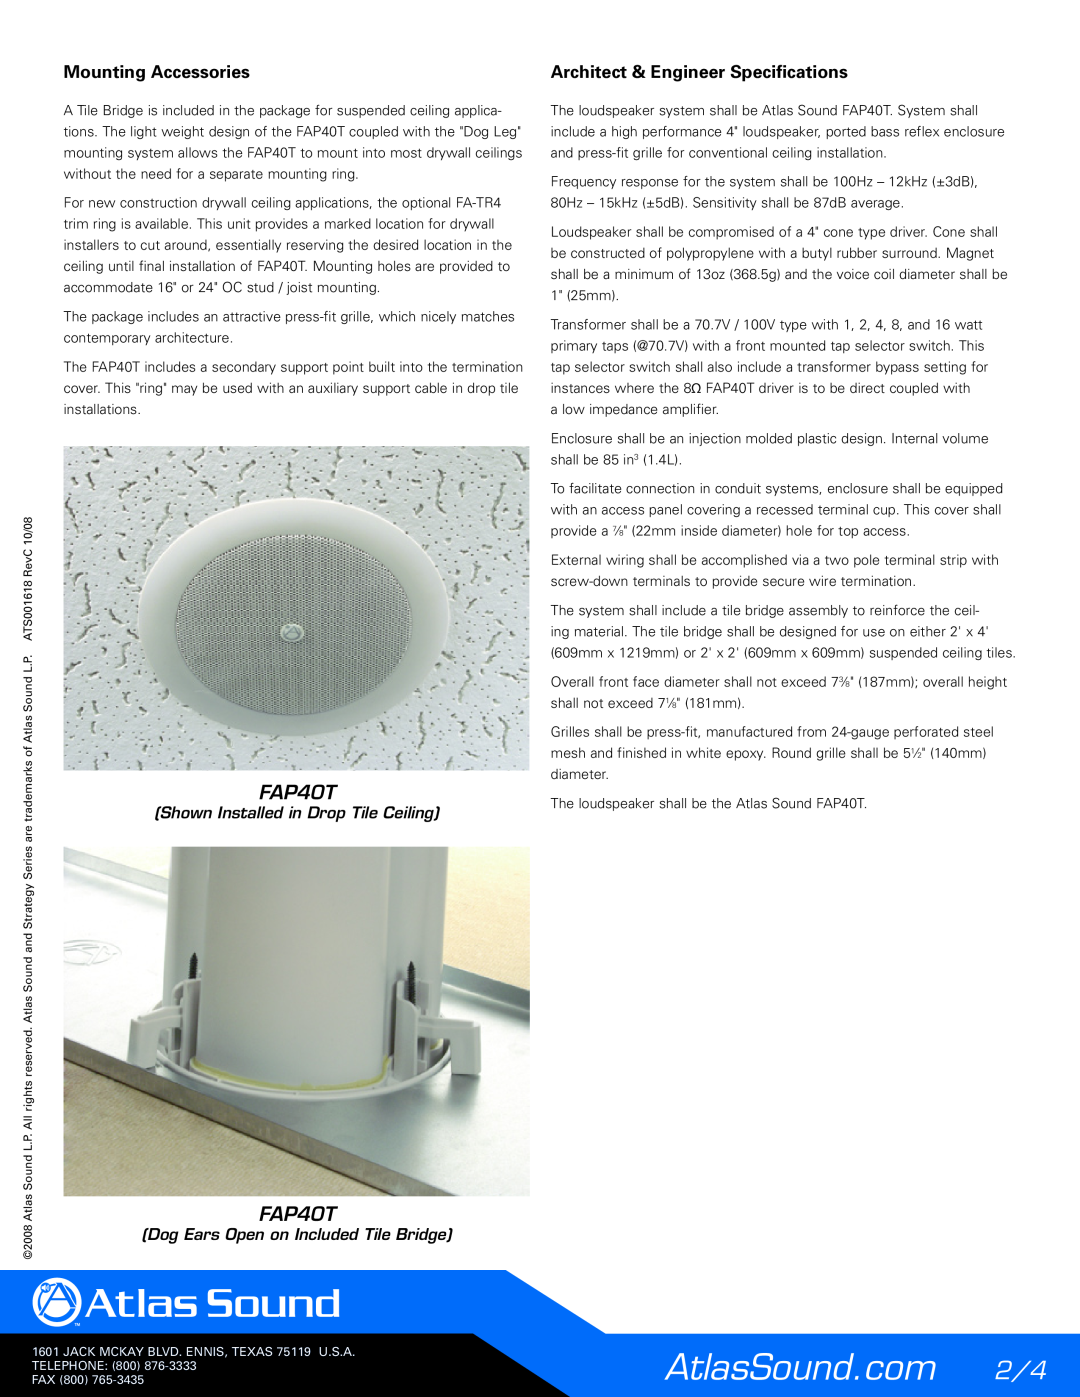 Atlas Sound FAP40T Mounting Accessories, Architect & Engineer Specifications, Shown Installed in Drop Tile Ceiling 